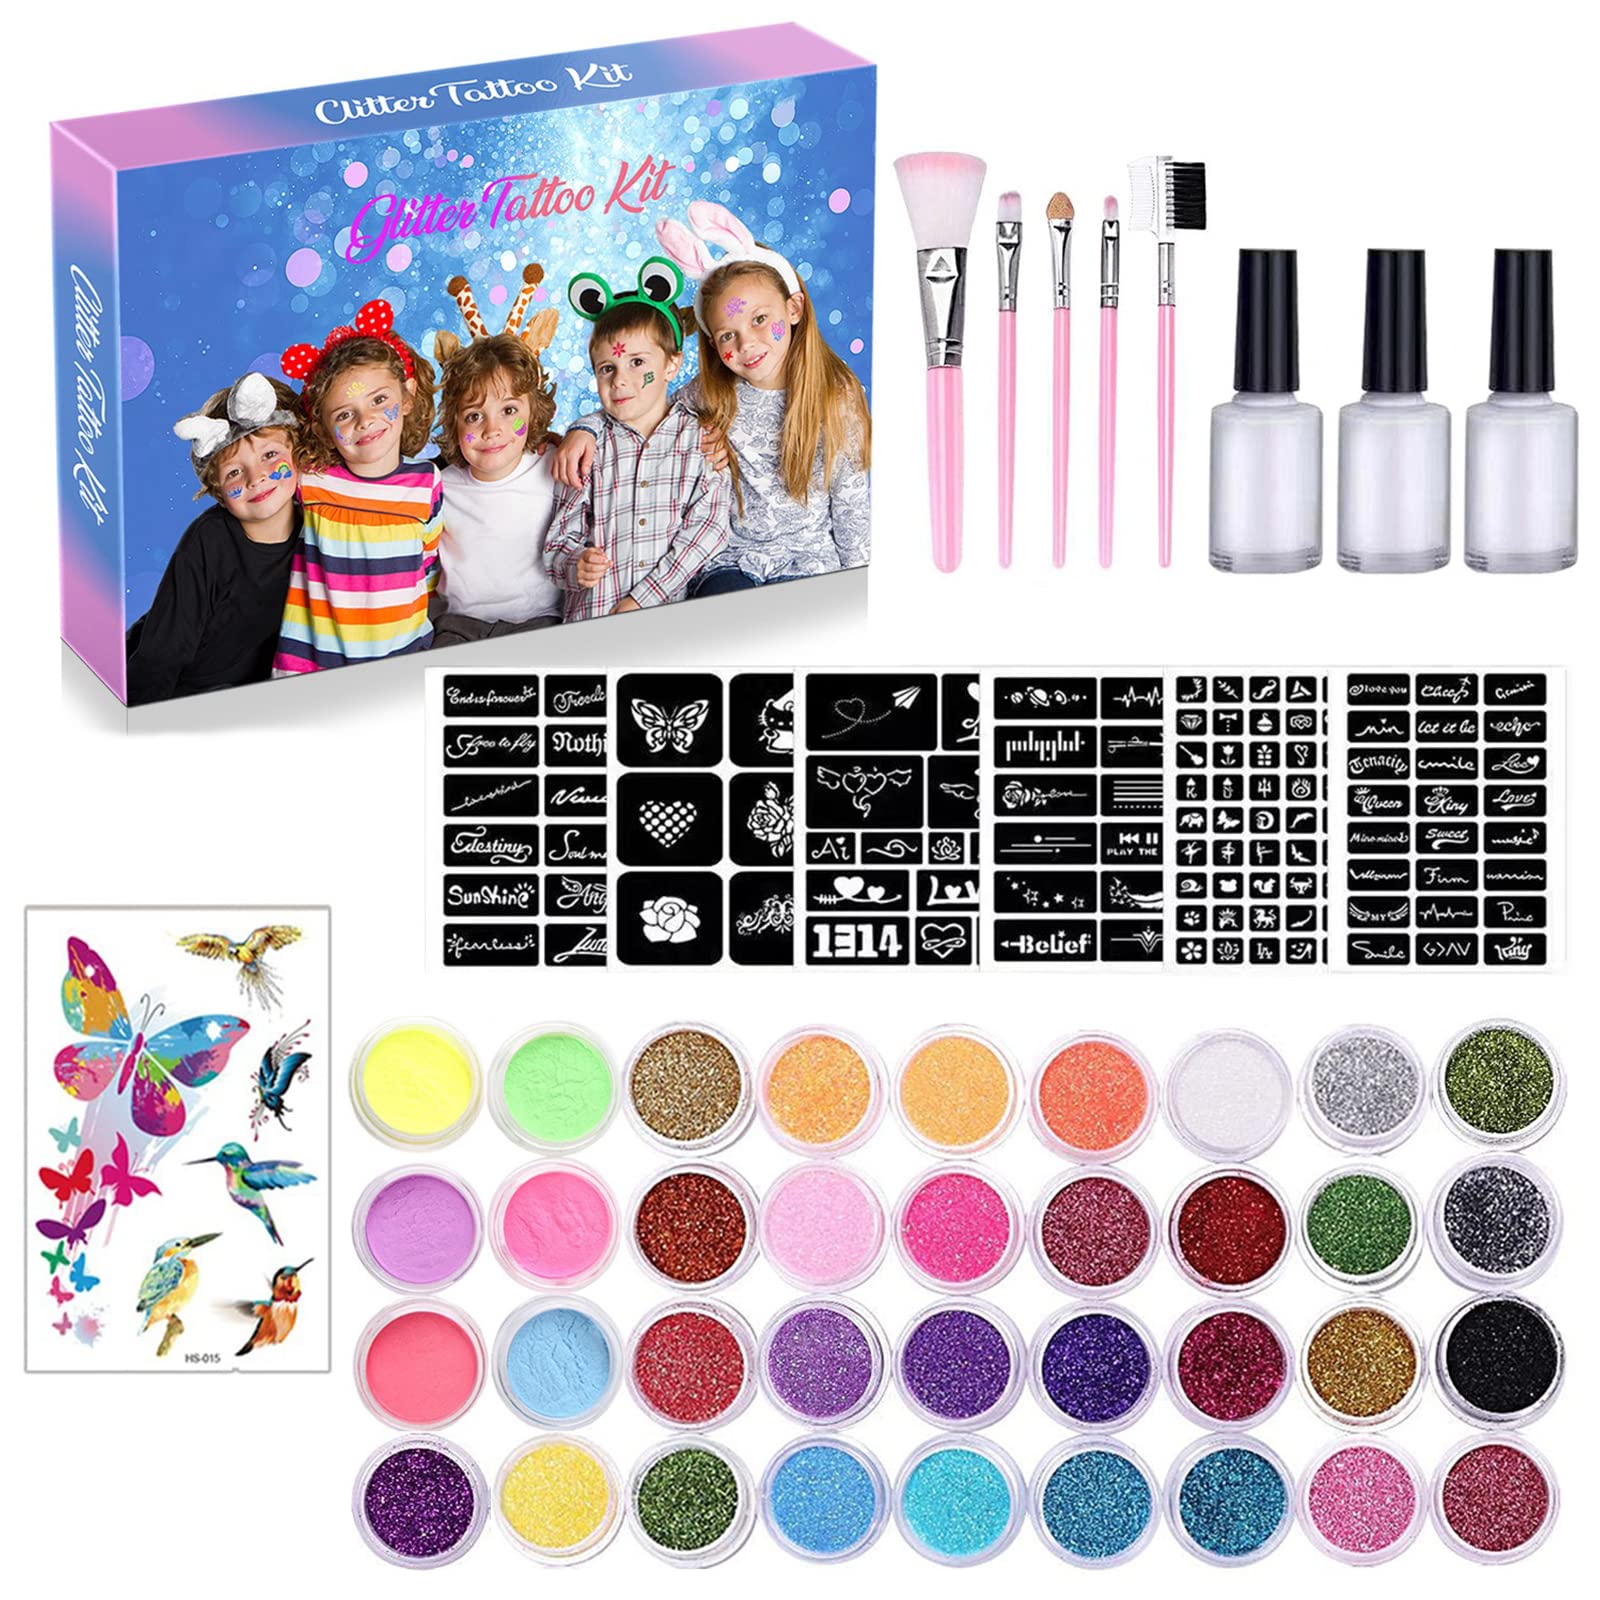 CkFyahp Temporary Glitter Tattoo Kit for Kids with 30 Glitter Colors 6  Fluorescent Colors 119 Unique Stencils 3 Body Glue 5 Brushes Arts Glitter  Make Up Set for Birthdays Party Favor Supplies